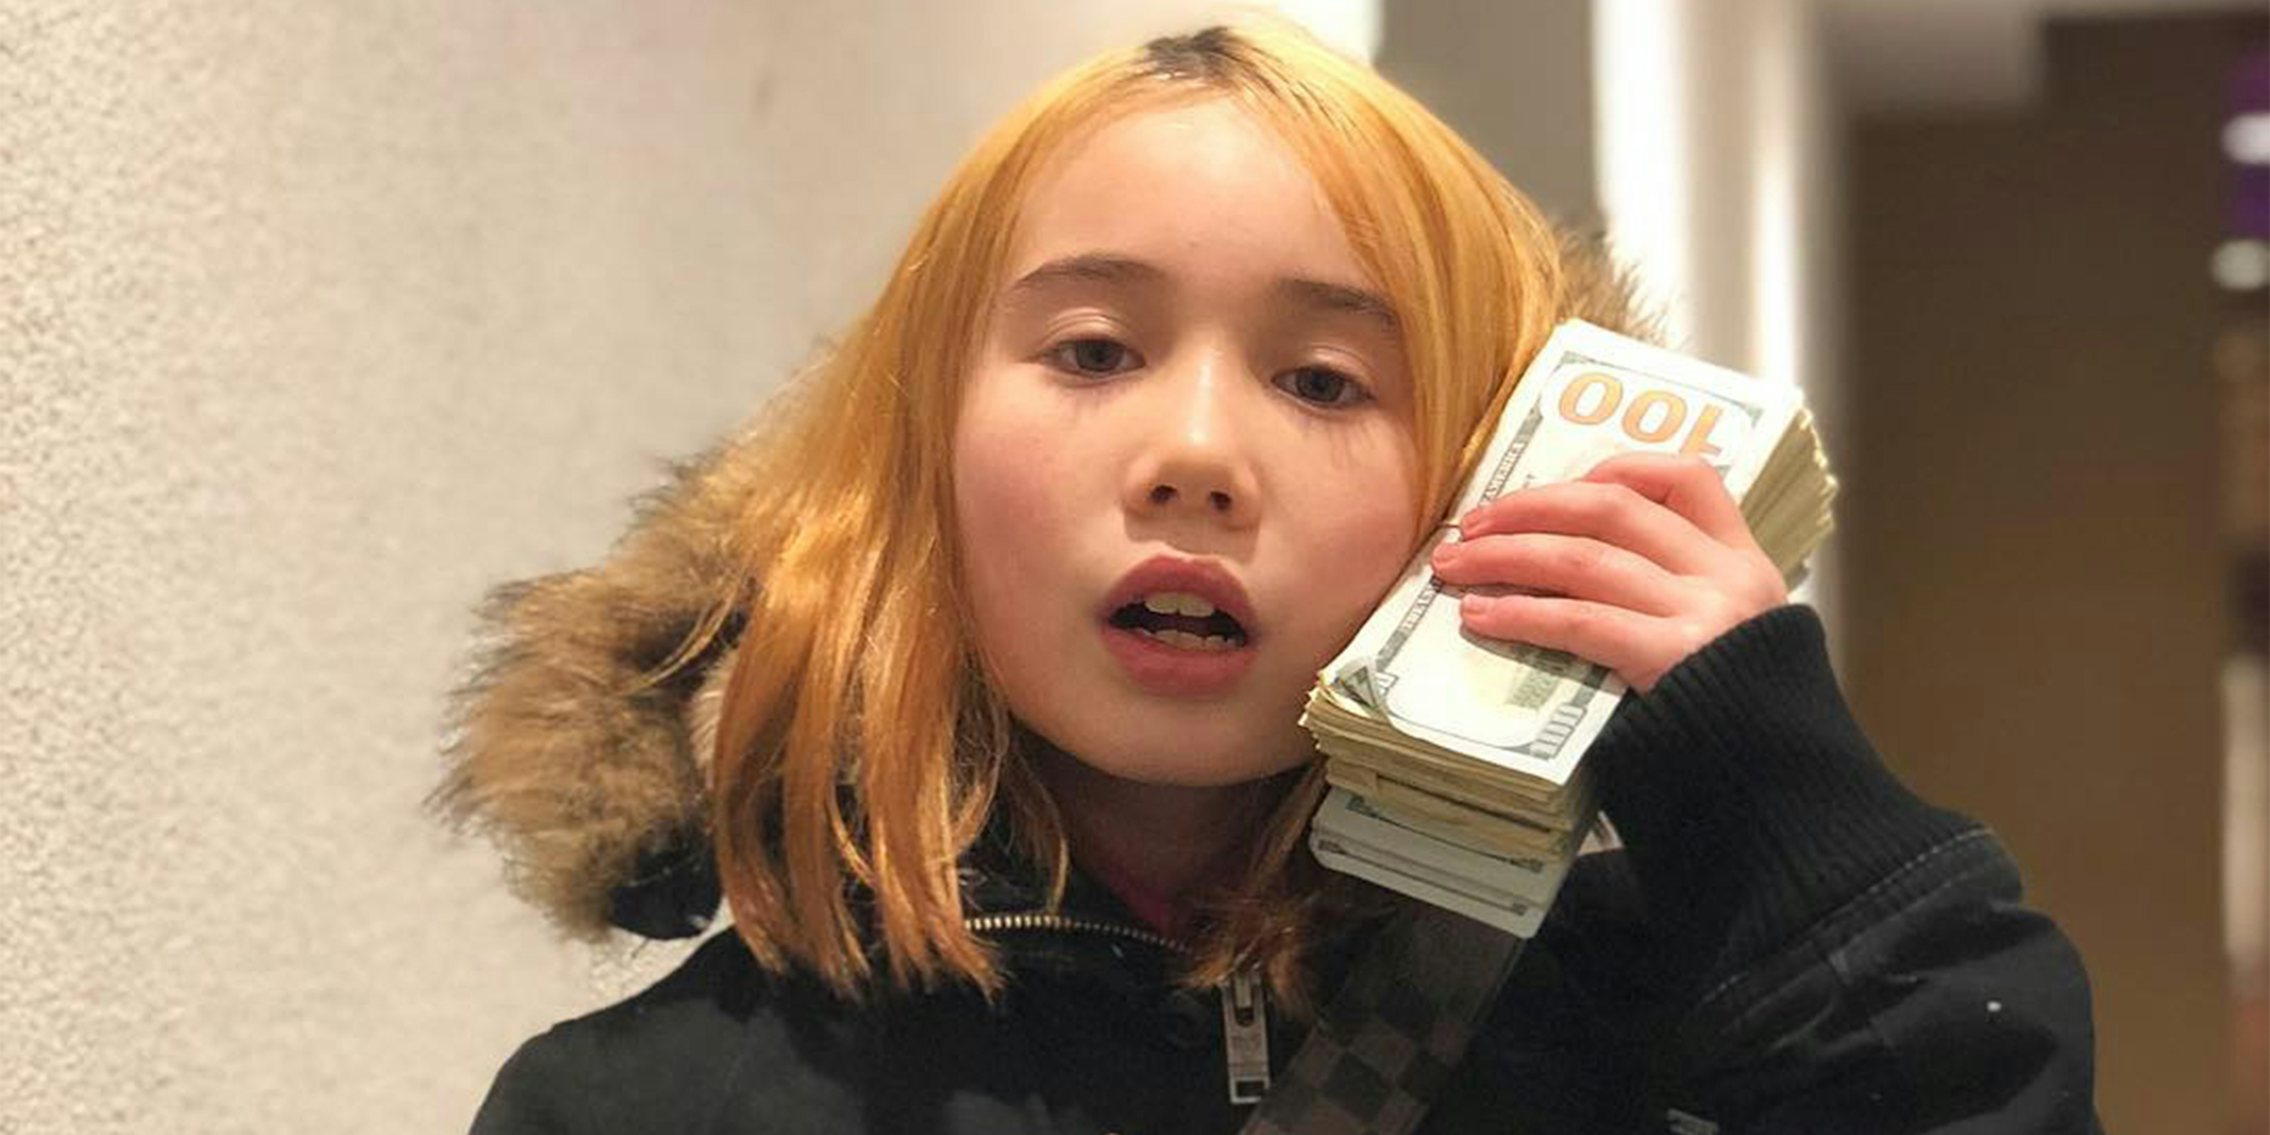 lil Tay with stack of hundred dollar bills up to head like a phone